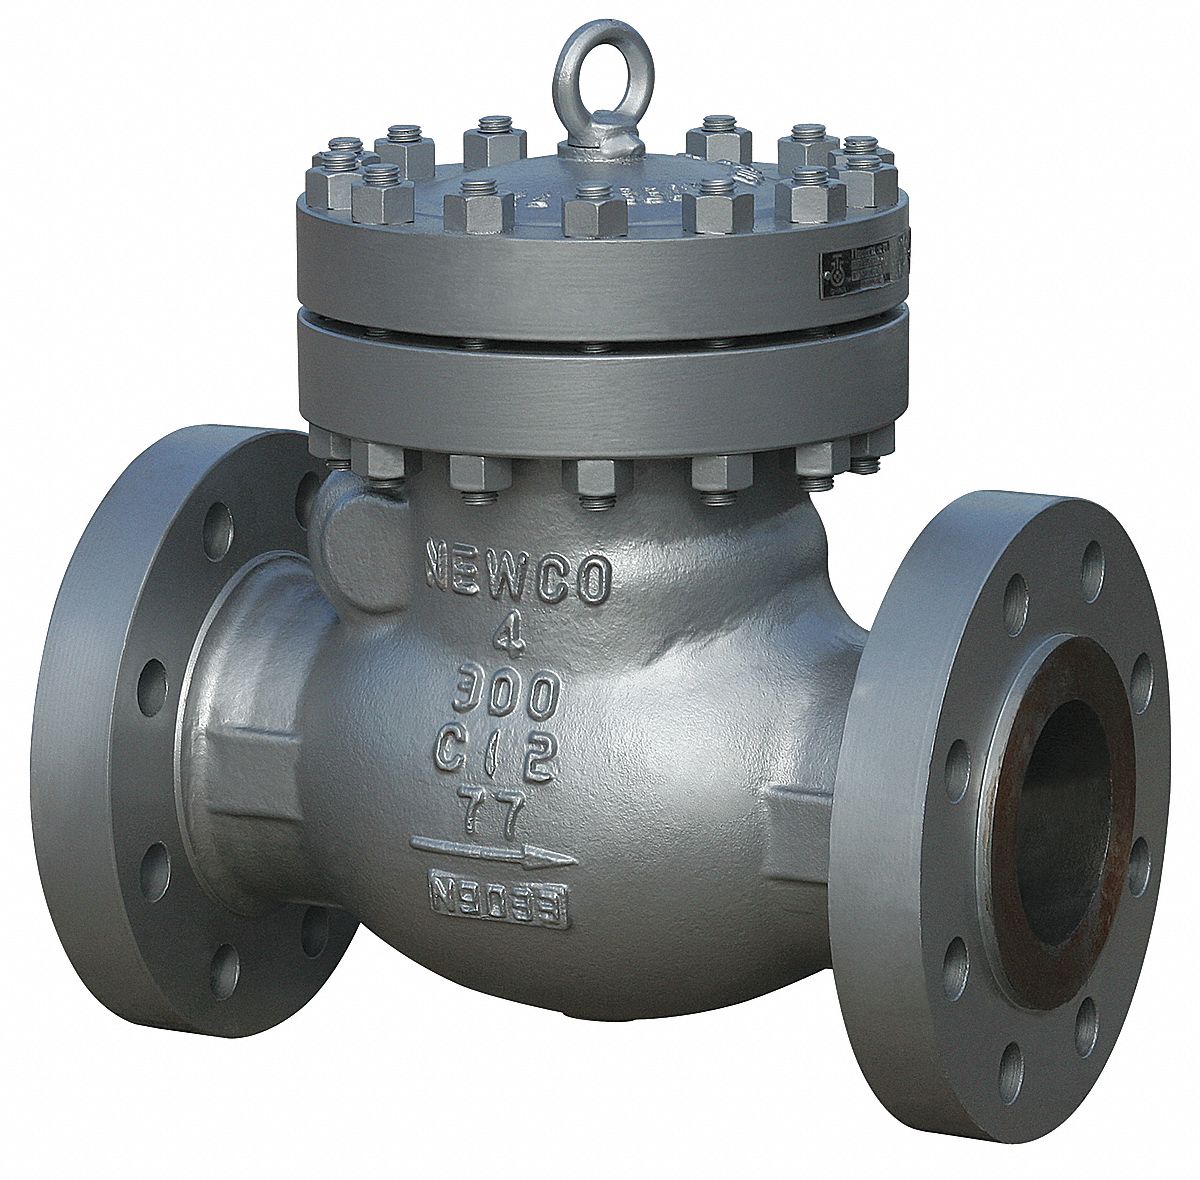 4 Flanged Swing Check Valve